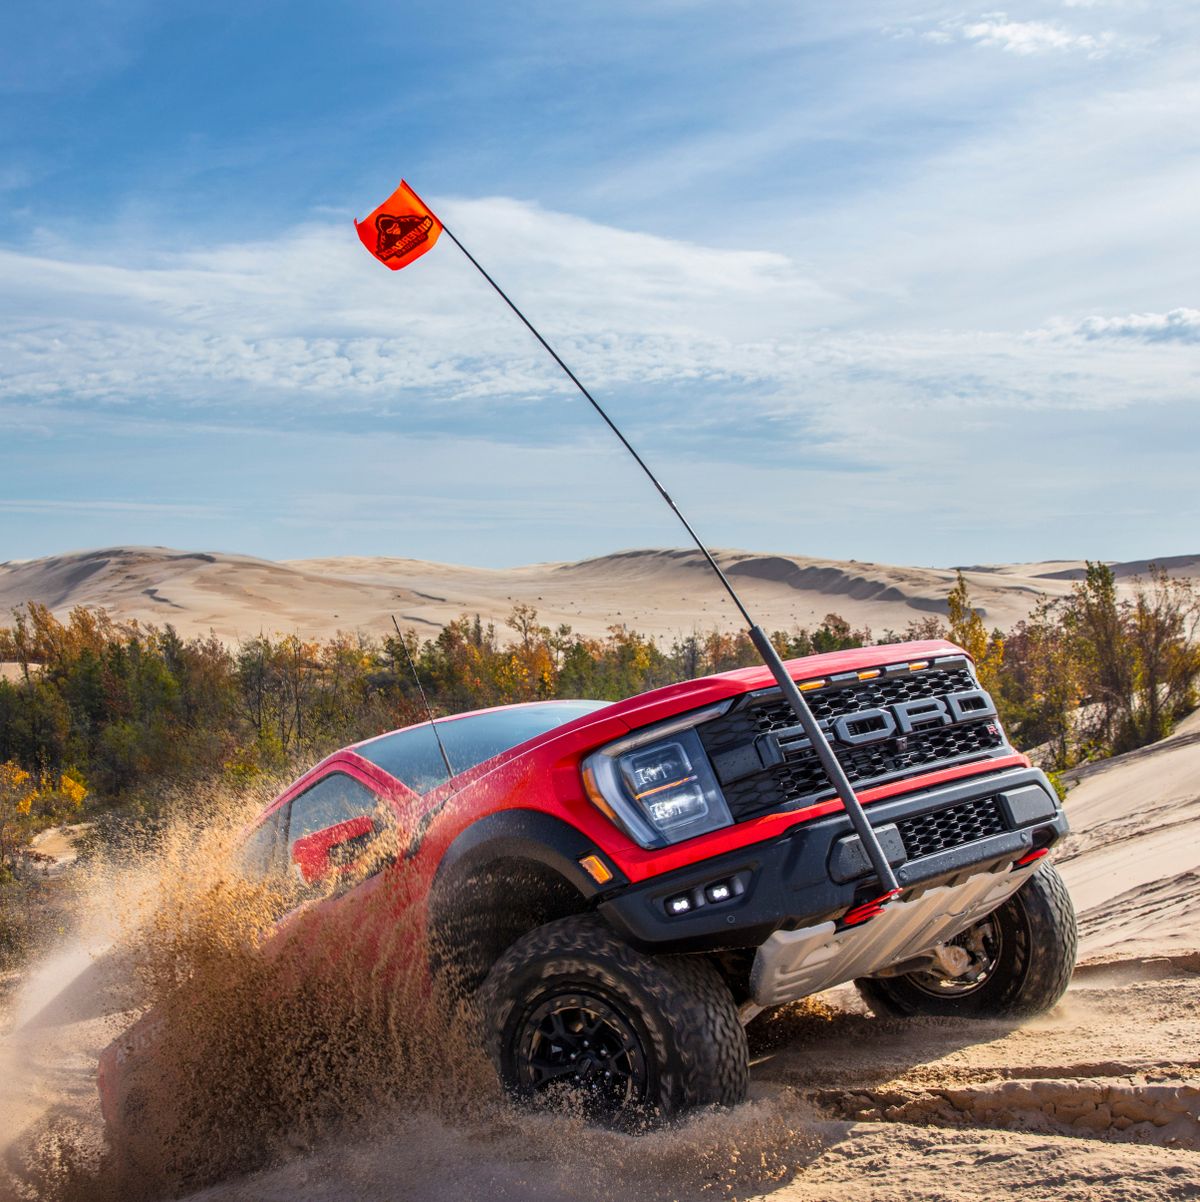 New Raptor R Delivers Incredible Power